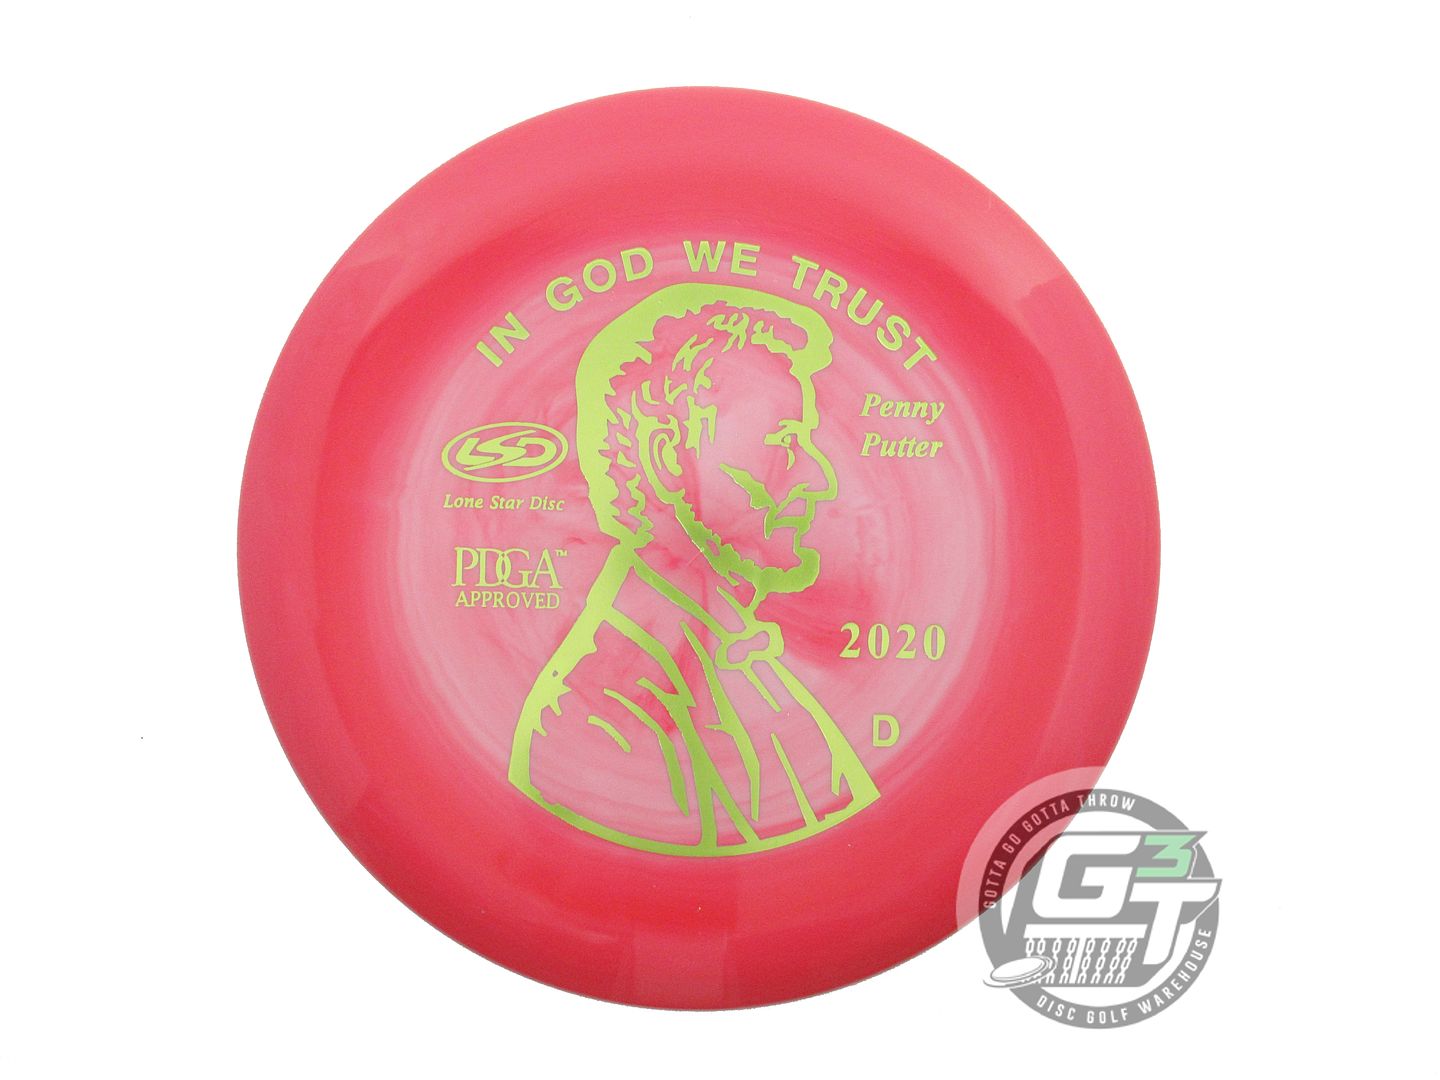 Lone Star Artist Series Alpha Penny Putter Golf Disc (Individually Listed)